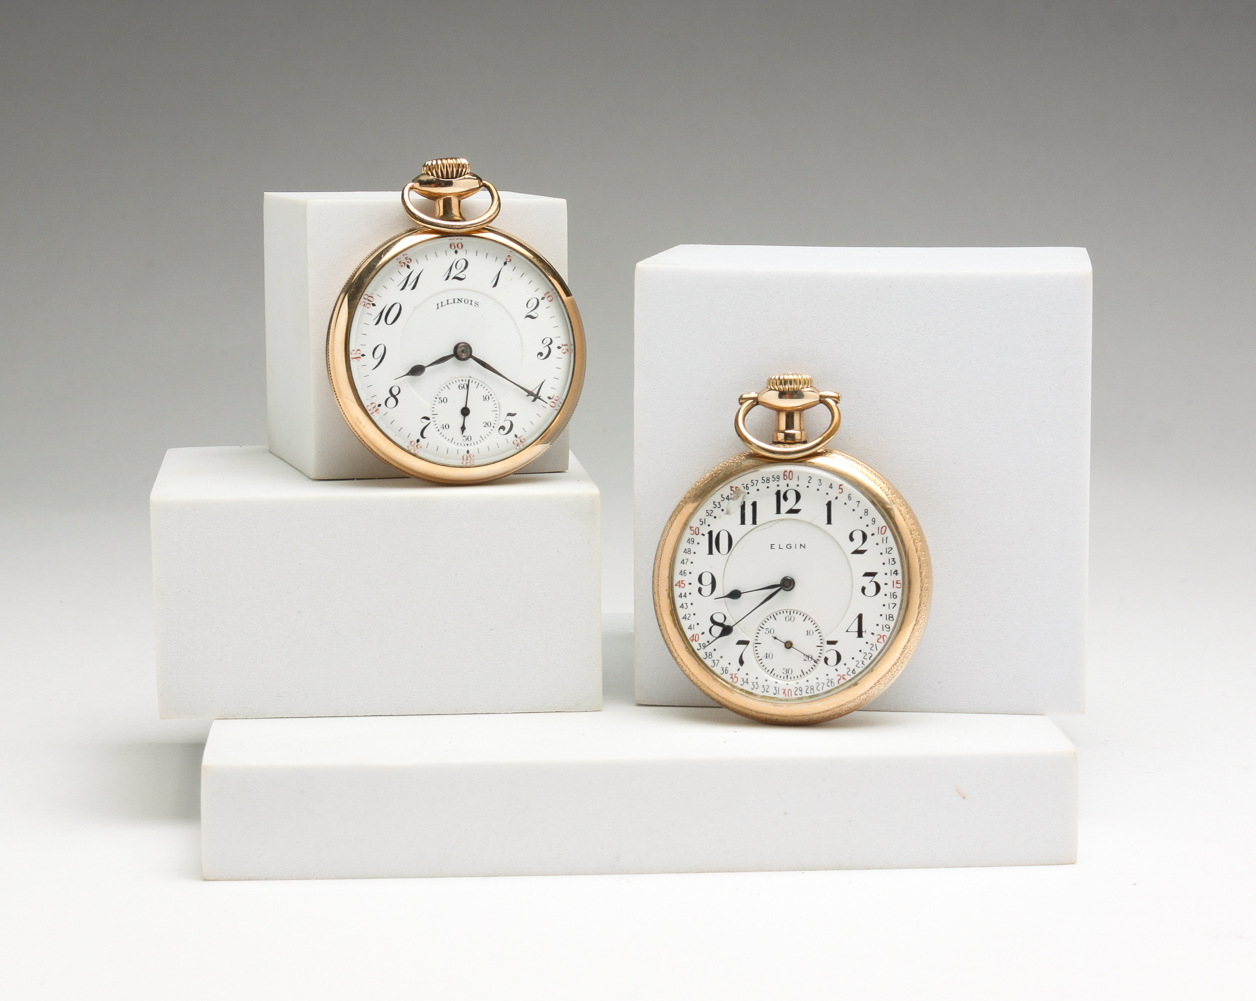 TWO AMERICAN 16 SIZE POCKET WATCHES  2e02f5